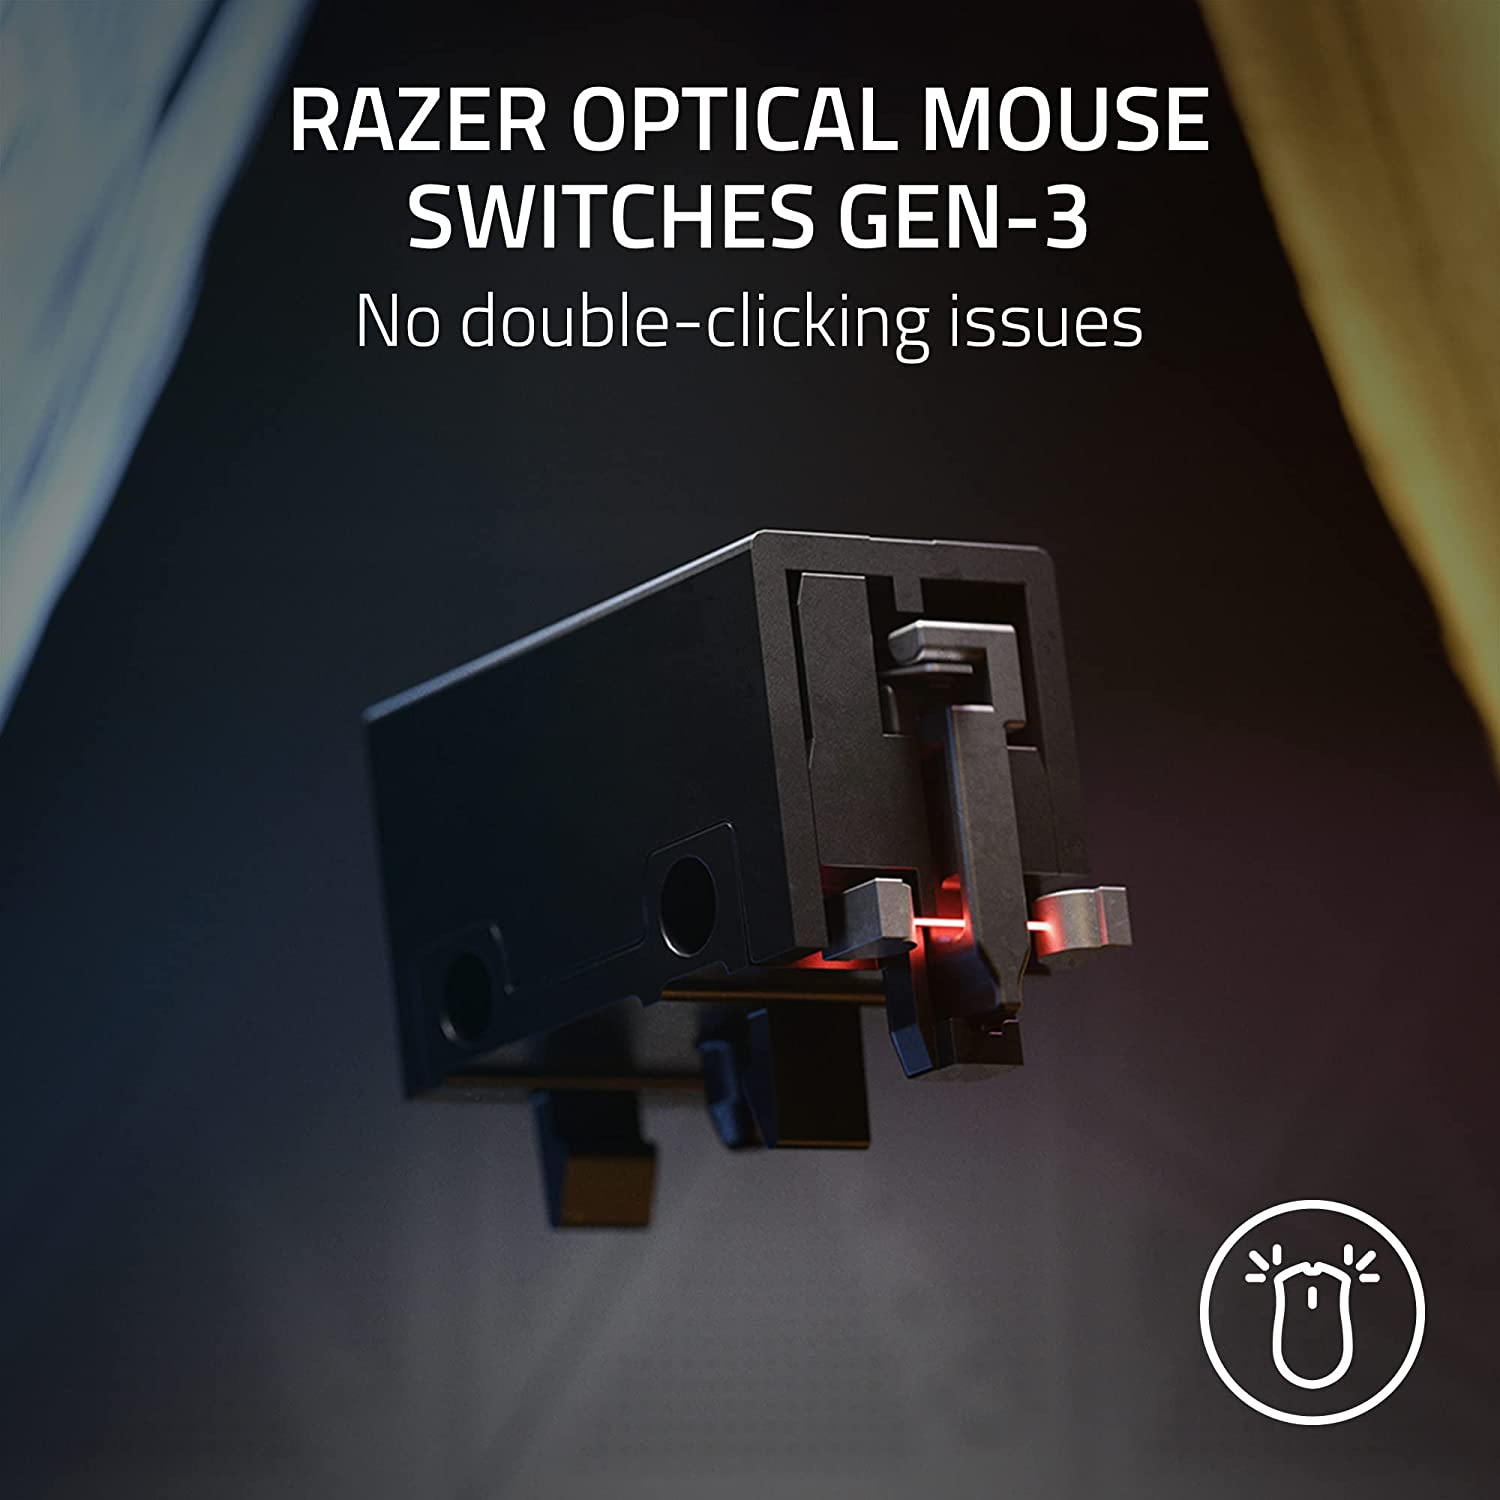 Razer DeathAdder V3 Wired Gaming Mouse: 59g Ultra Lightweight - Pro 30K Optical Sensor - Fast Optical Switches Gen-3-8K Hz HyperPolling - 6 Programmable Buttons - Ergonomic - Speedflex Cable - Black